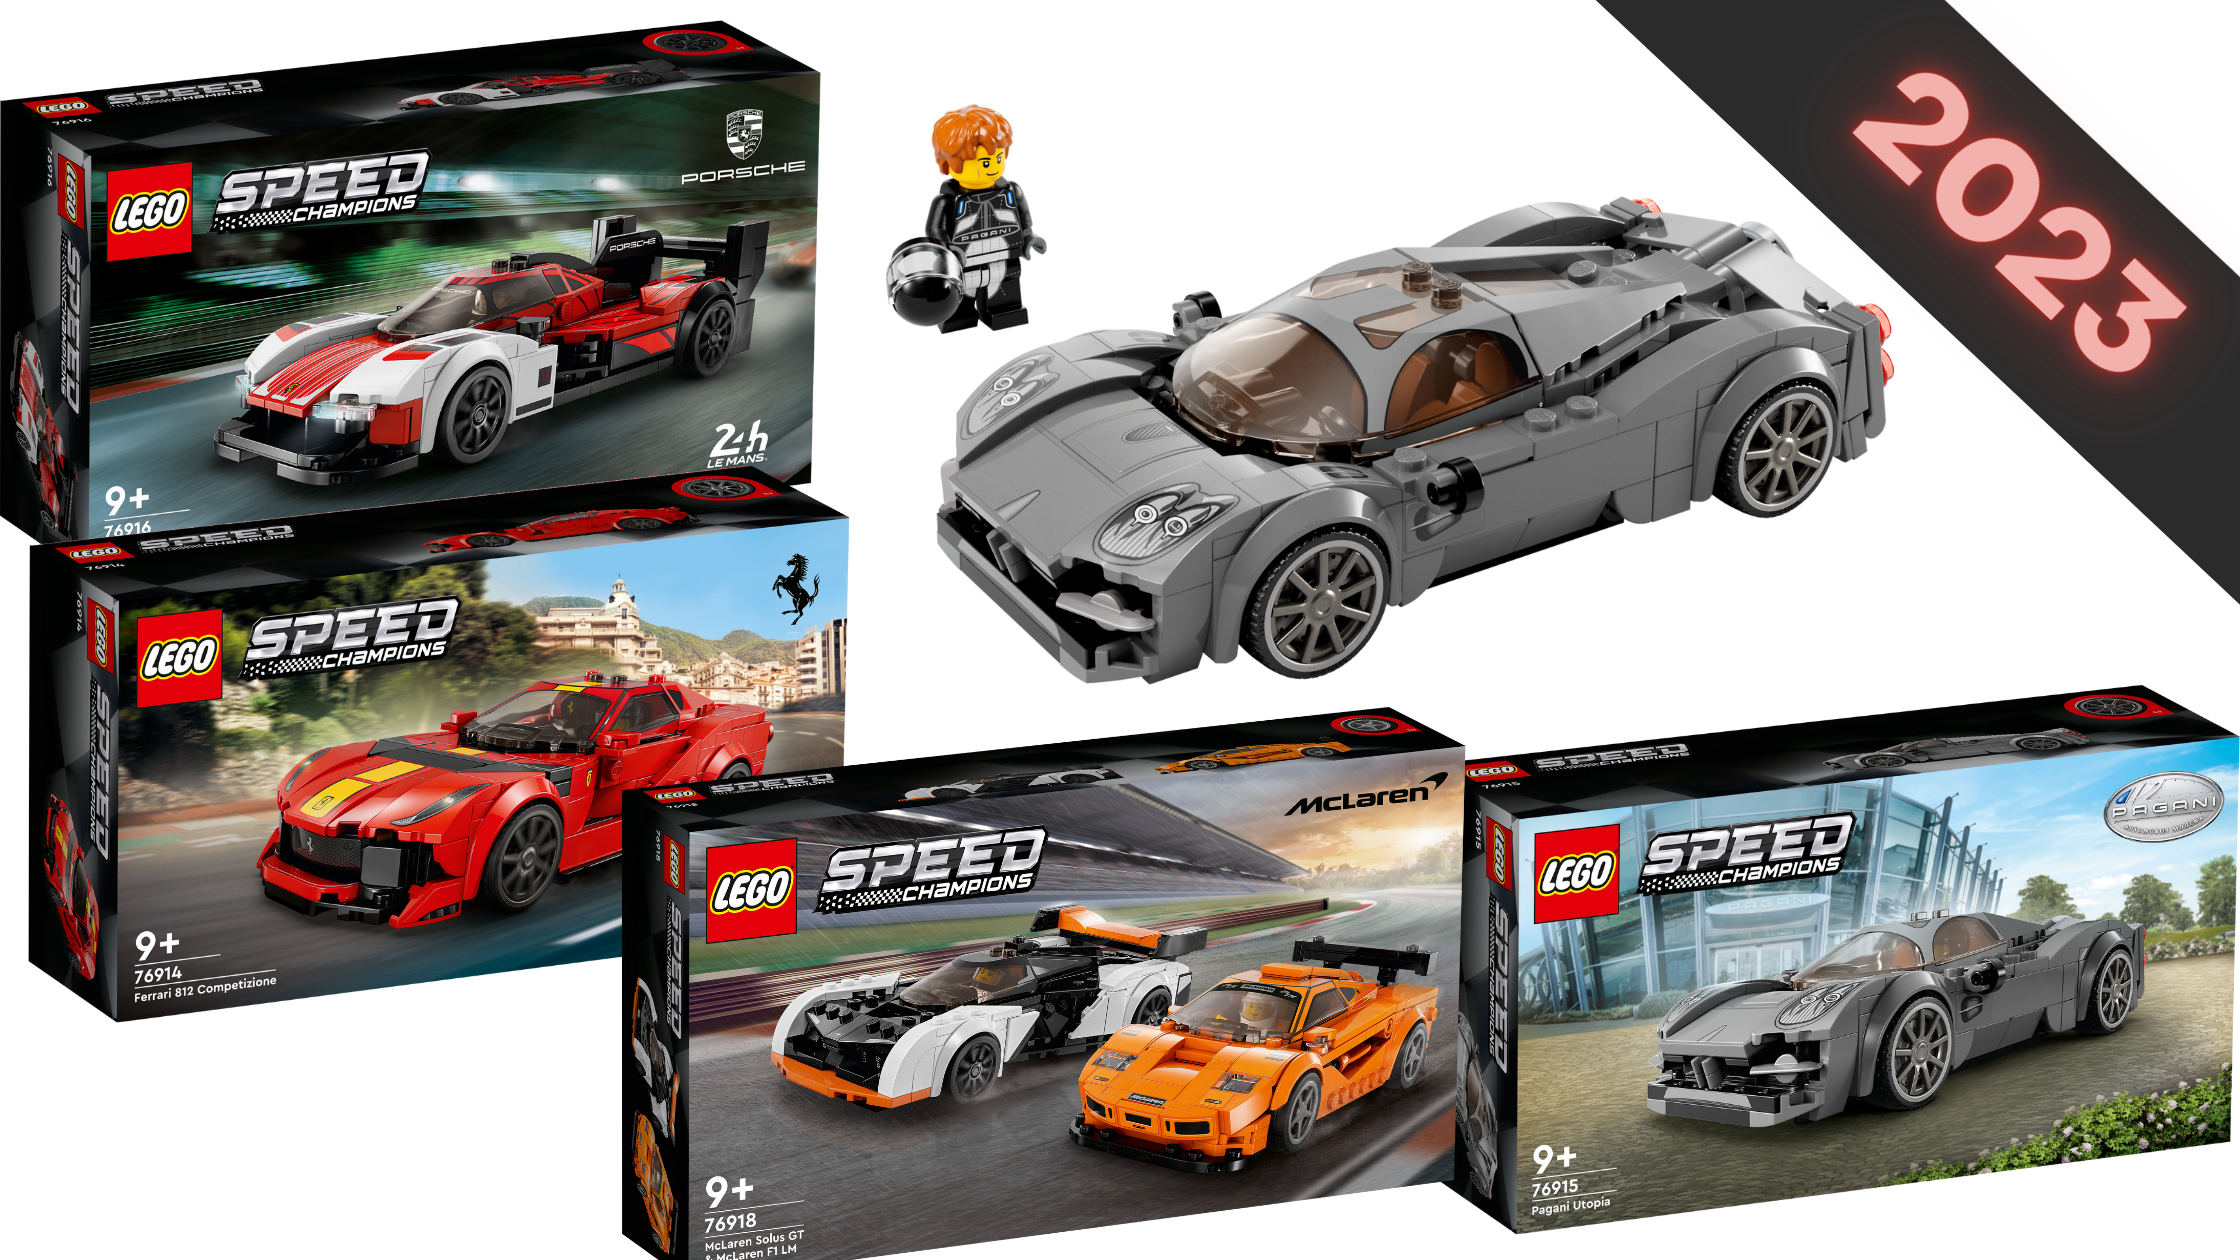 LEGO Speed Champions unveils four new sets coming in March 2023